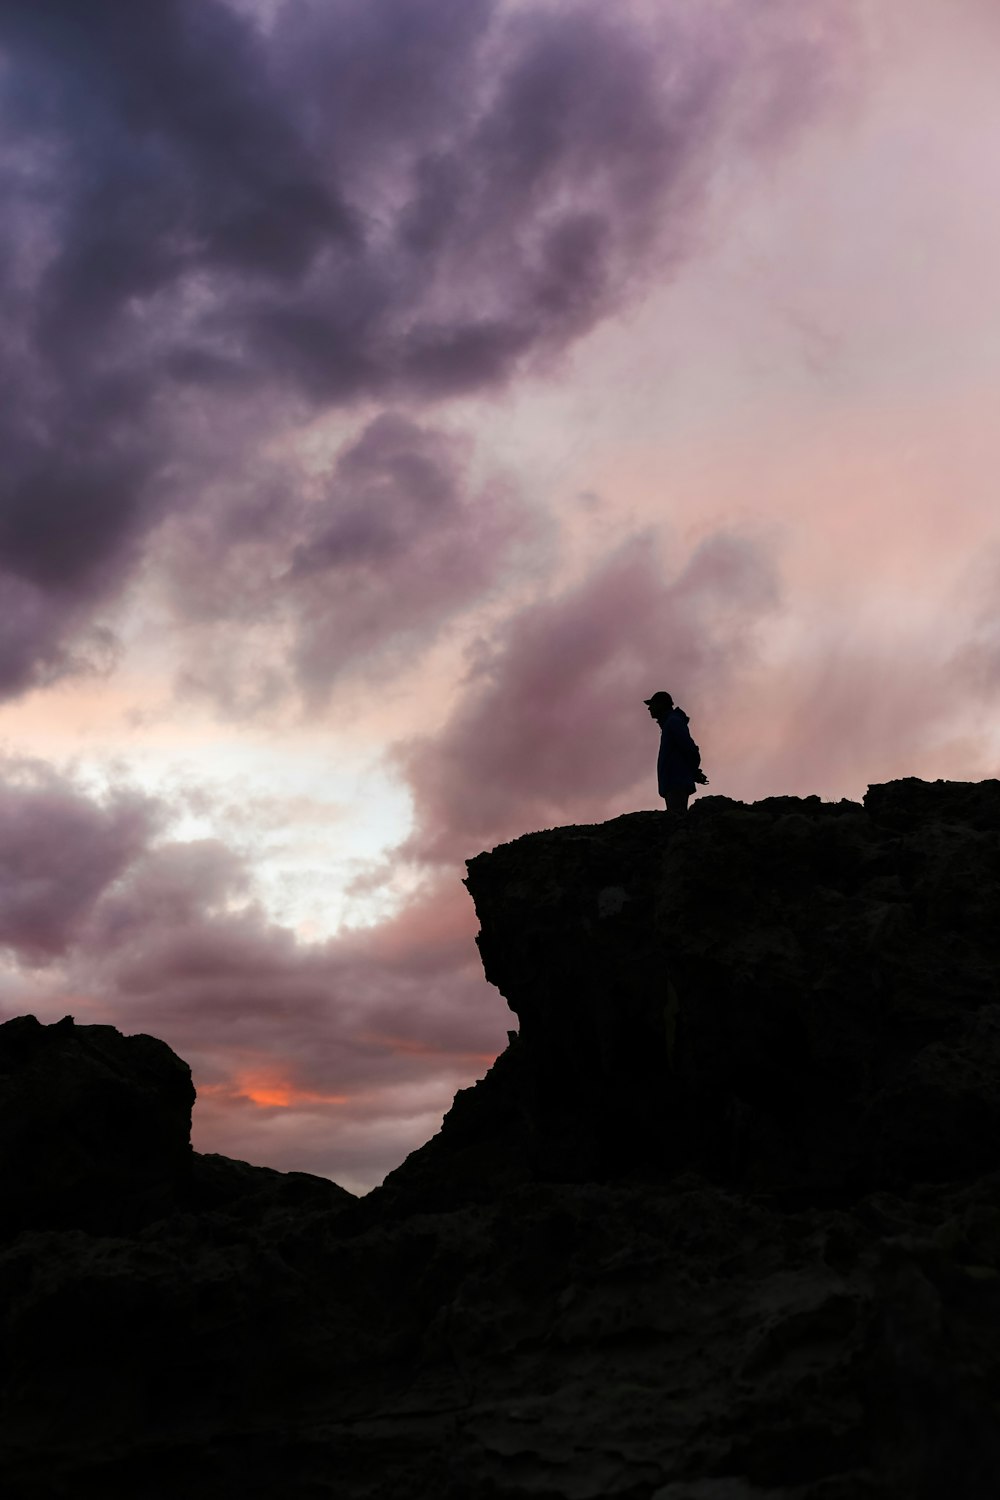 a man standing on top of a rocky cliff under a cloudy sky